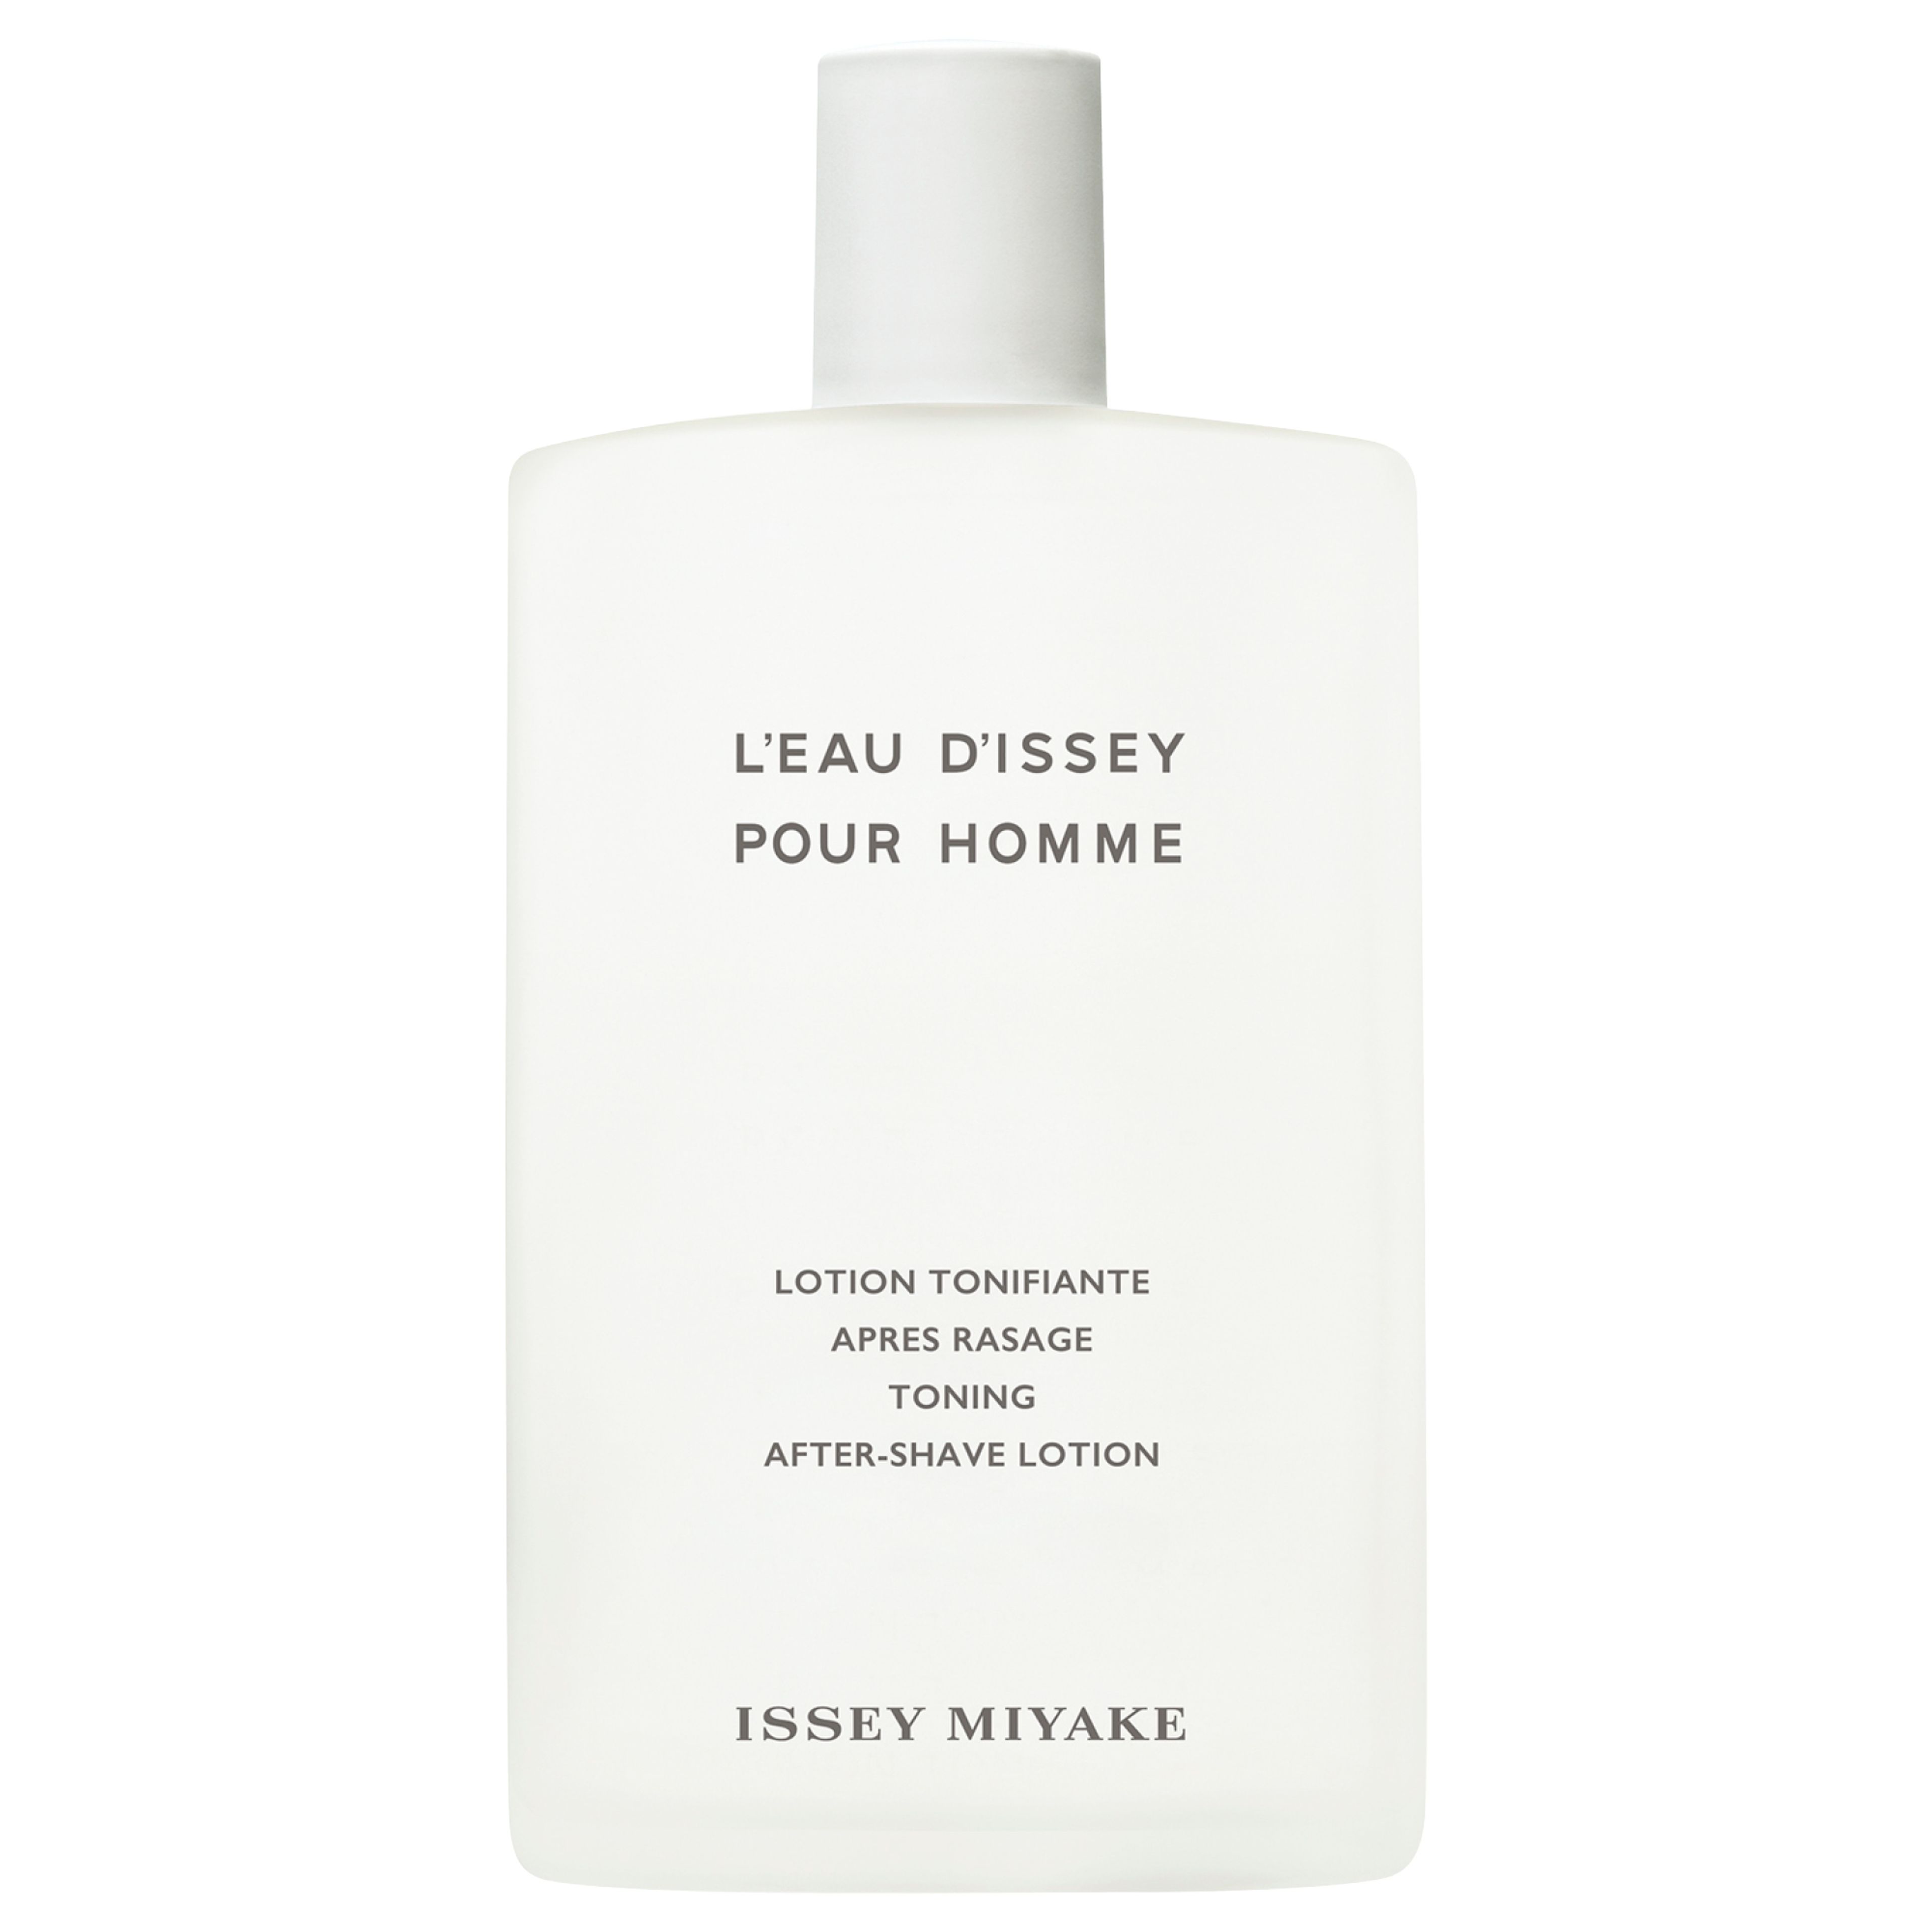 Issey Miyake L'eau D'issey Pour Homme Toning After-shave Lotion 1